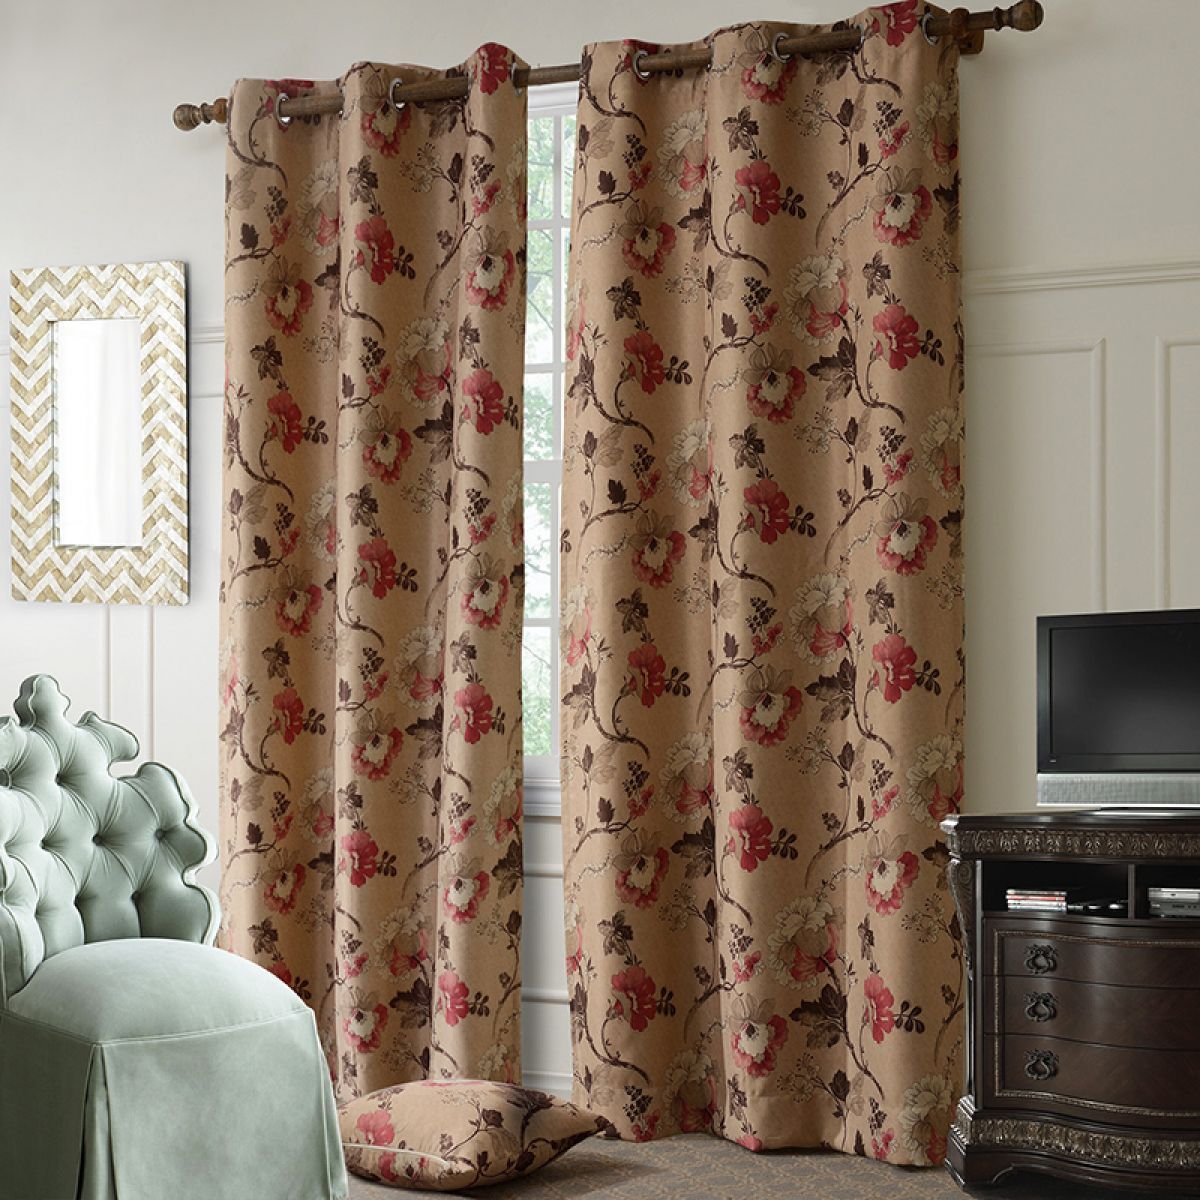 Floral On Brown Background Printed Window Curtain Home Decor